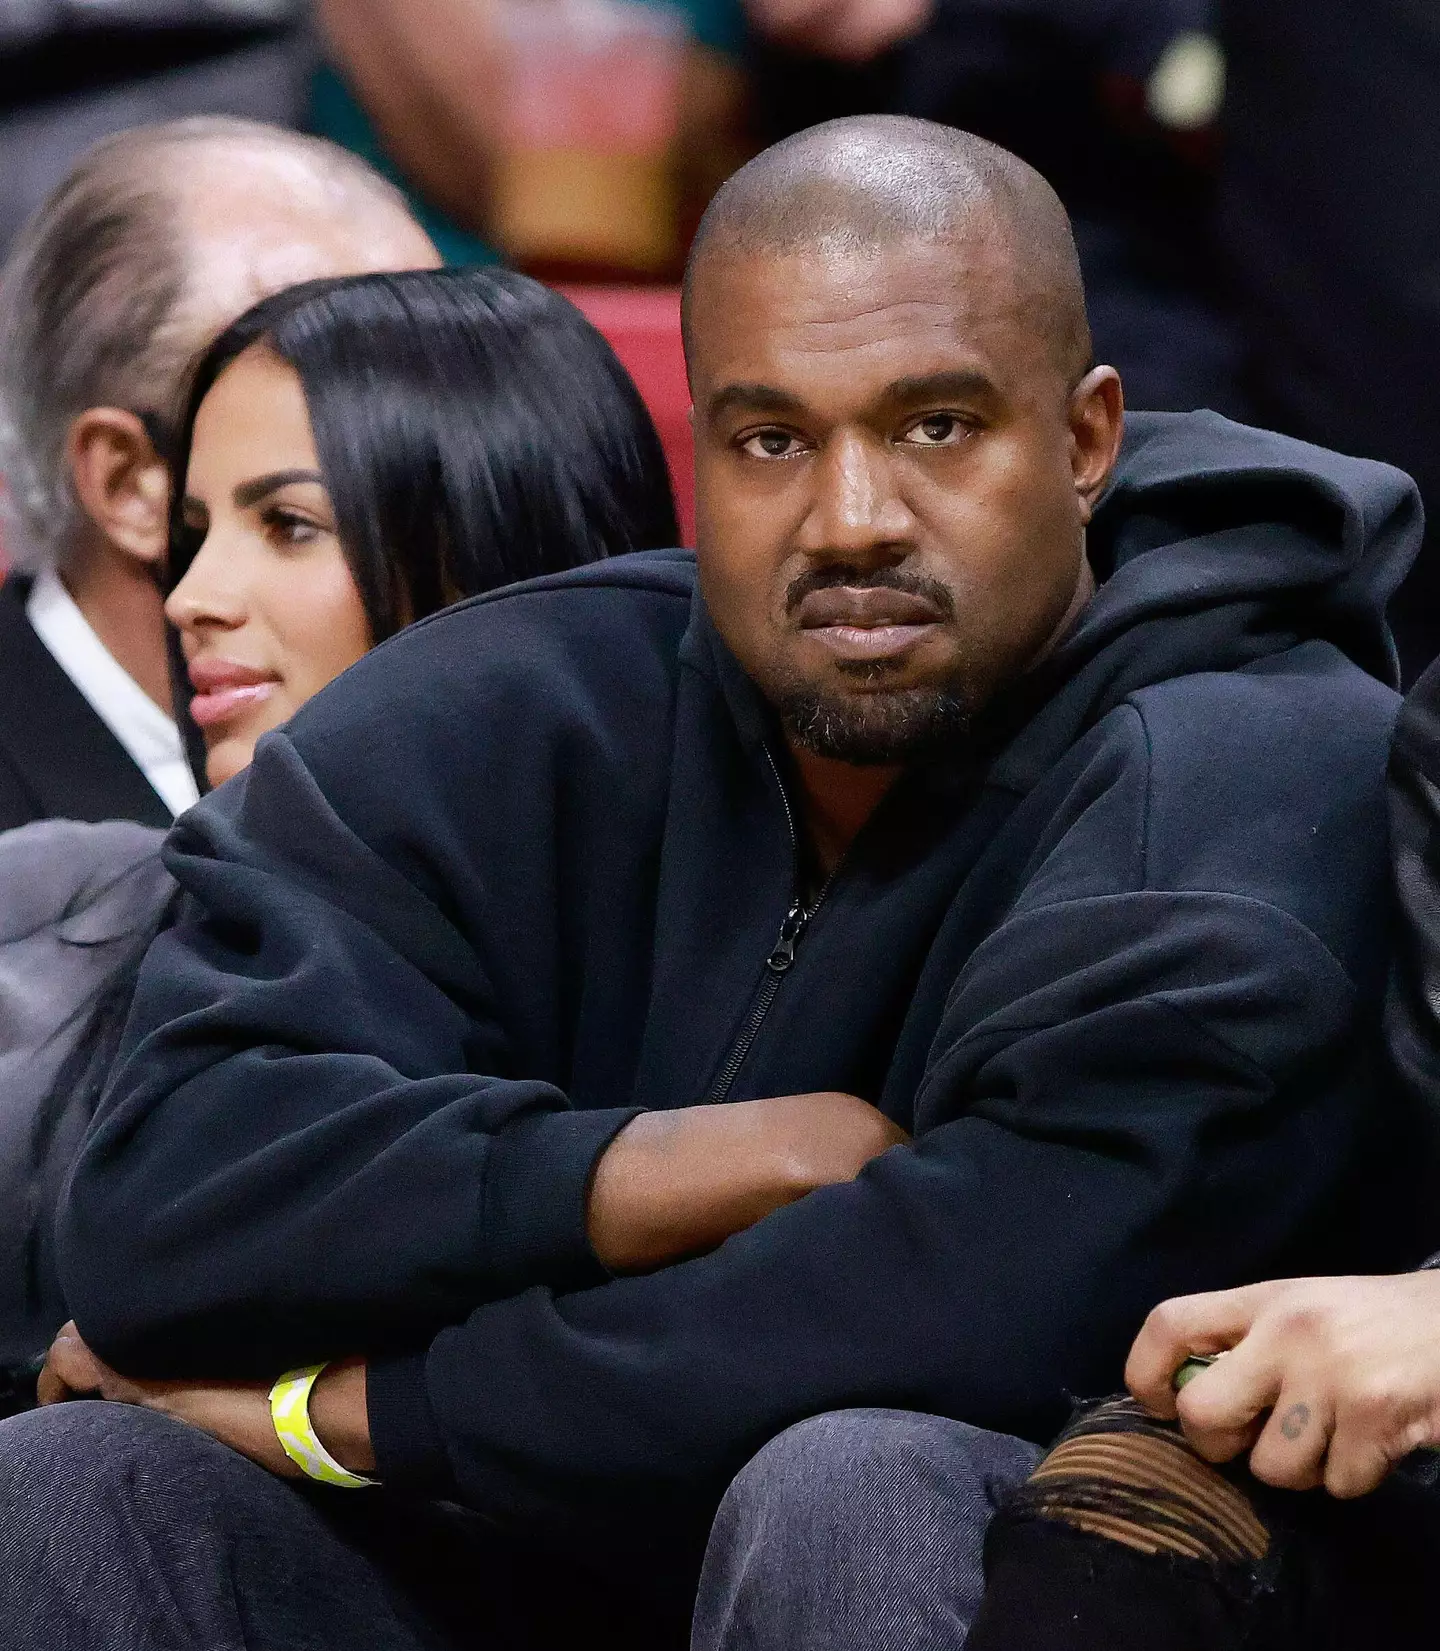 Kanye has been in real trouble - and rightly so - for his remarks.